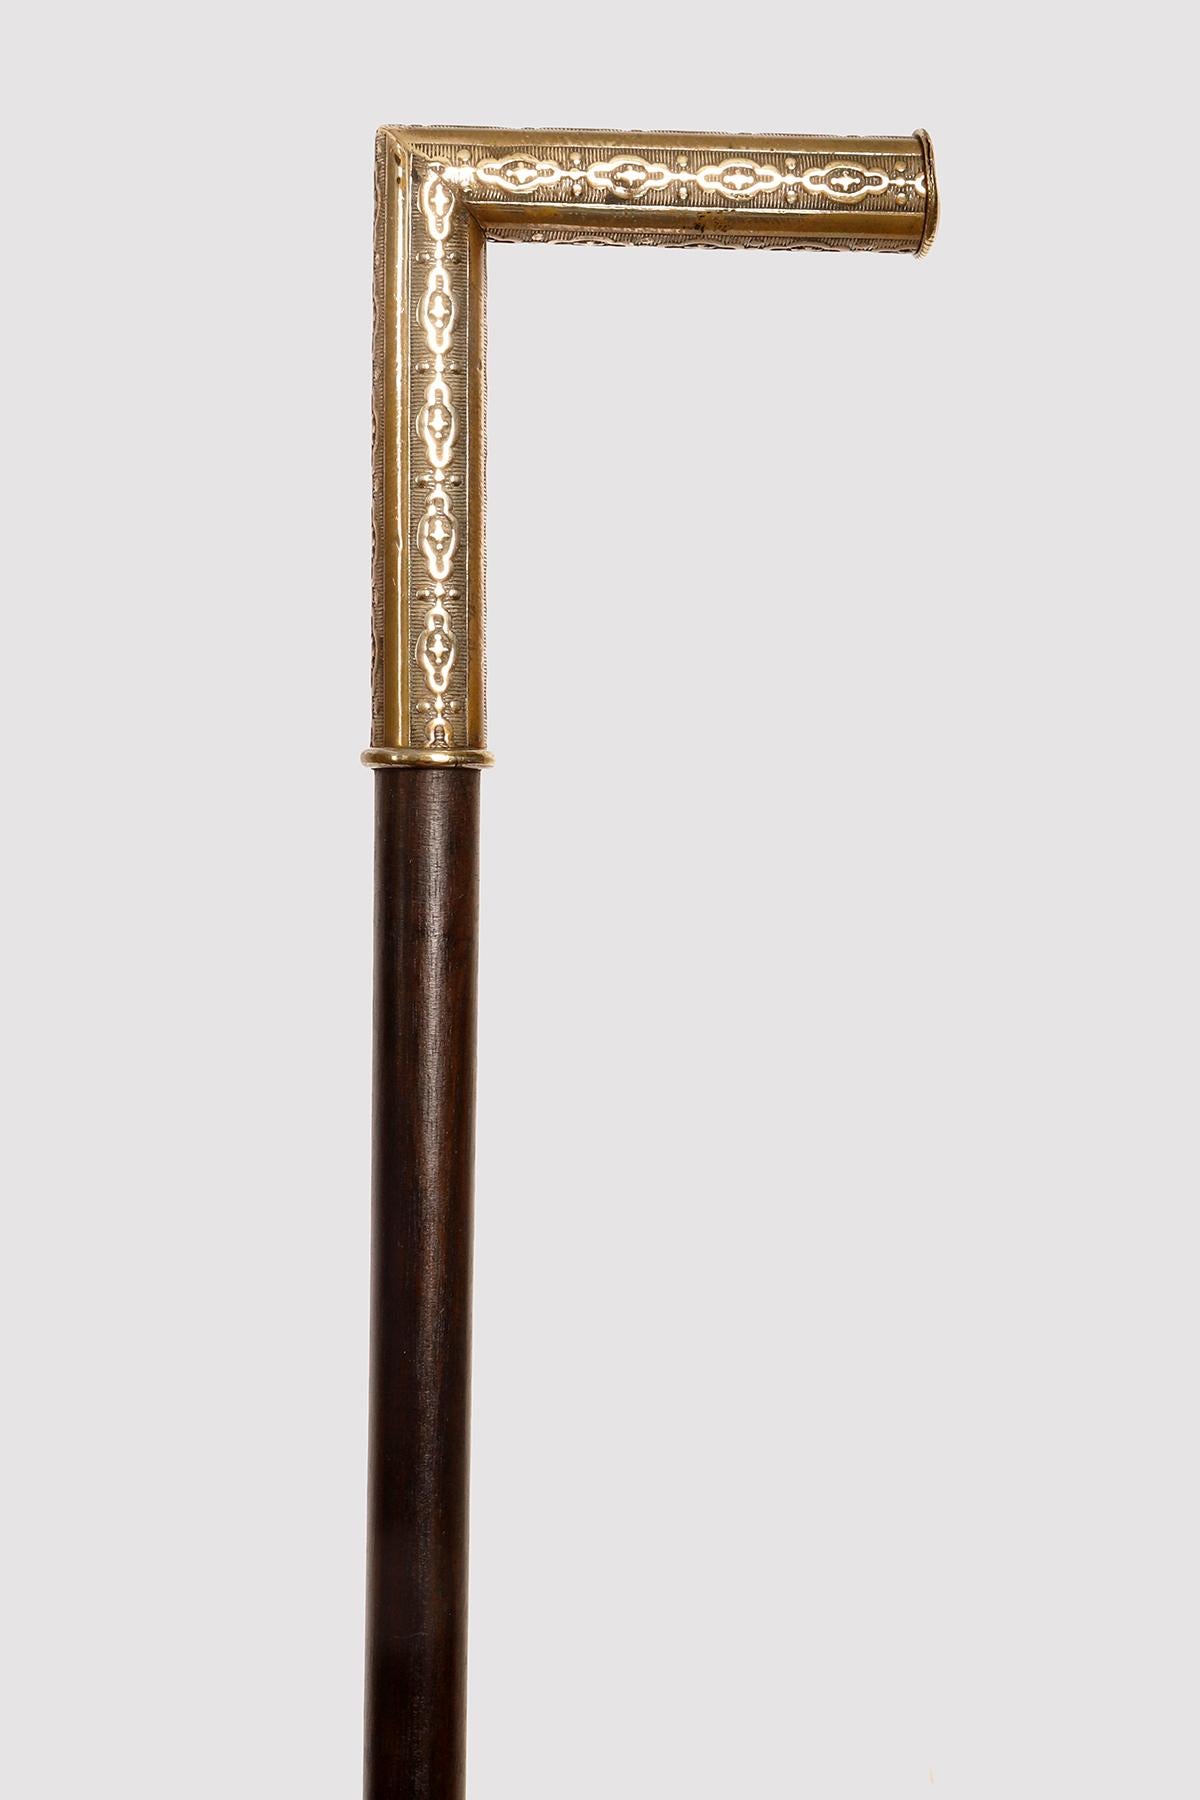 System walking stick with deer horn tip, santos wood shaft (Cesalpina Ferrea, Brazil). L-shaped handle in slightly silvered brass with smooth bands alternating with bands decorated with continuous motifs on a striped base. At the end of the